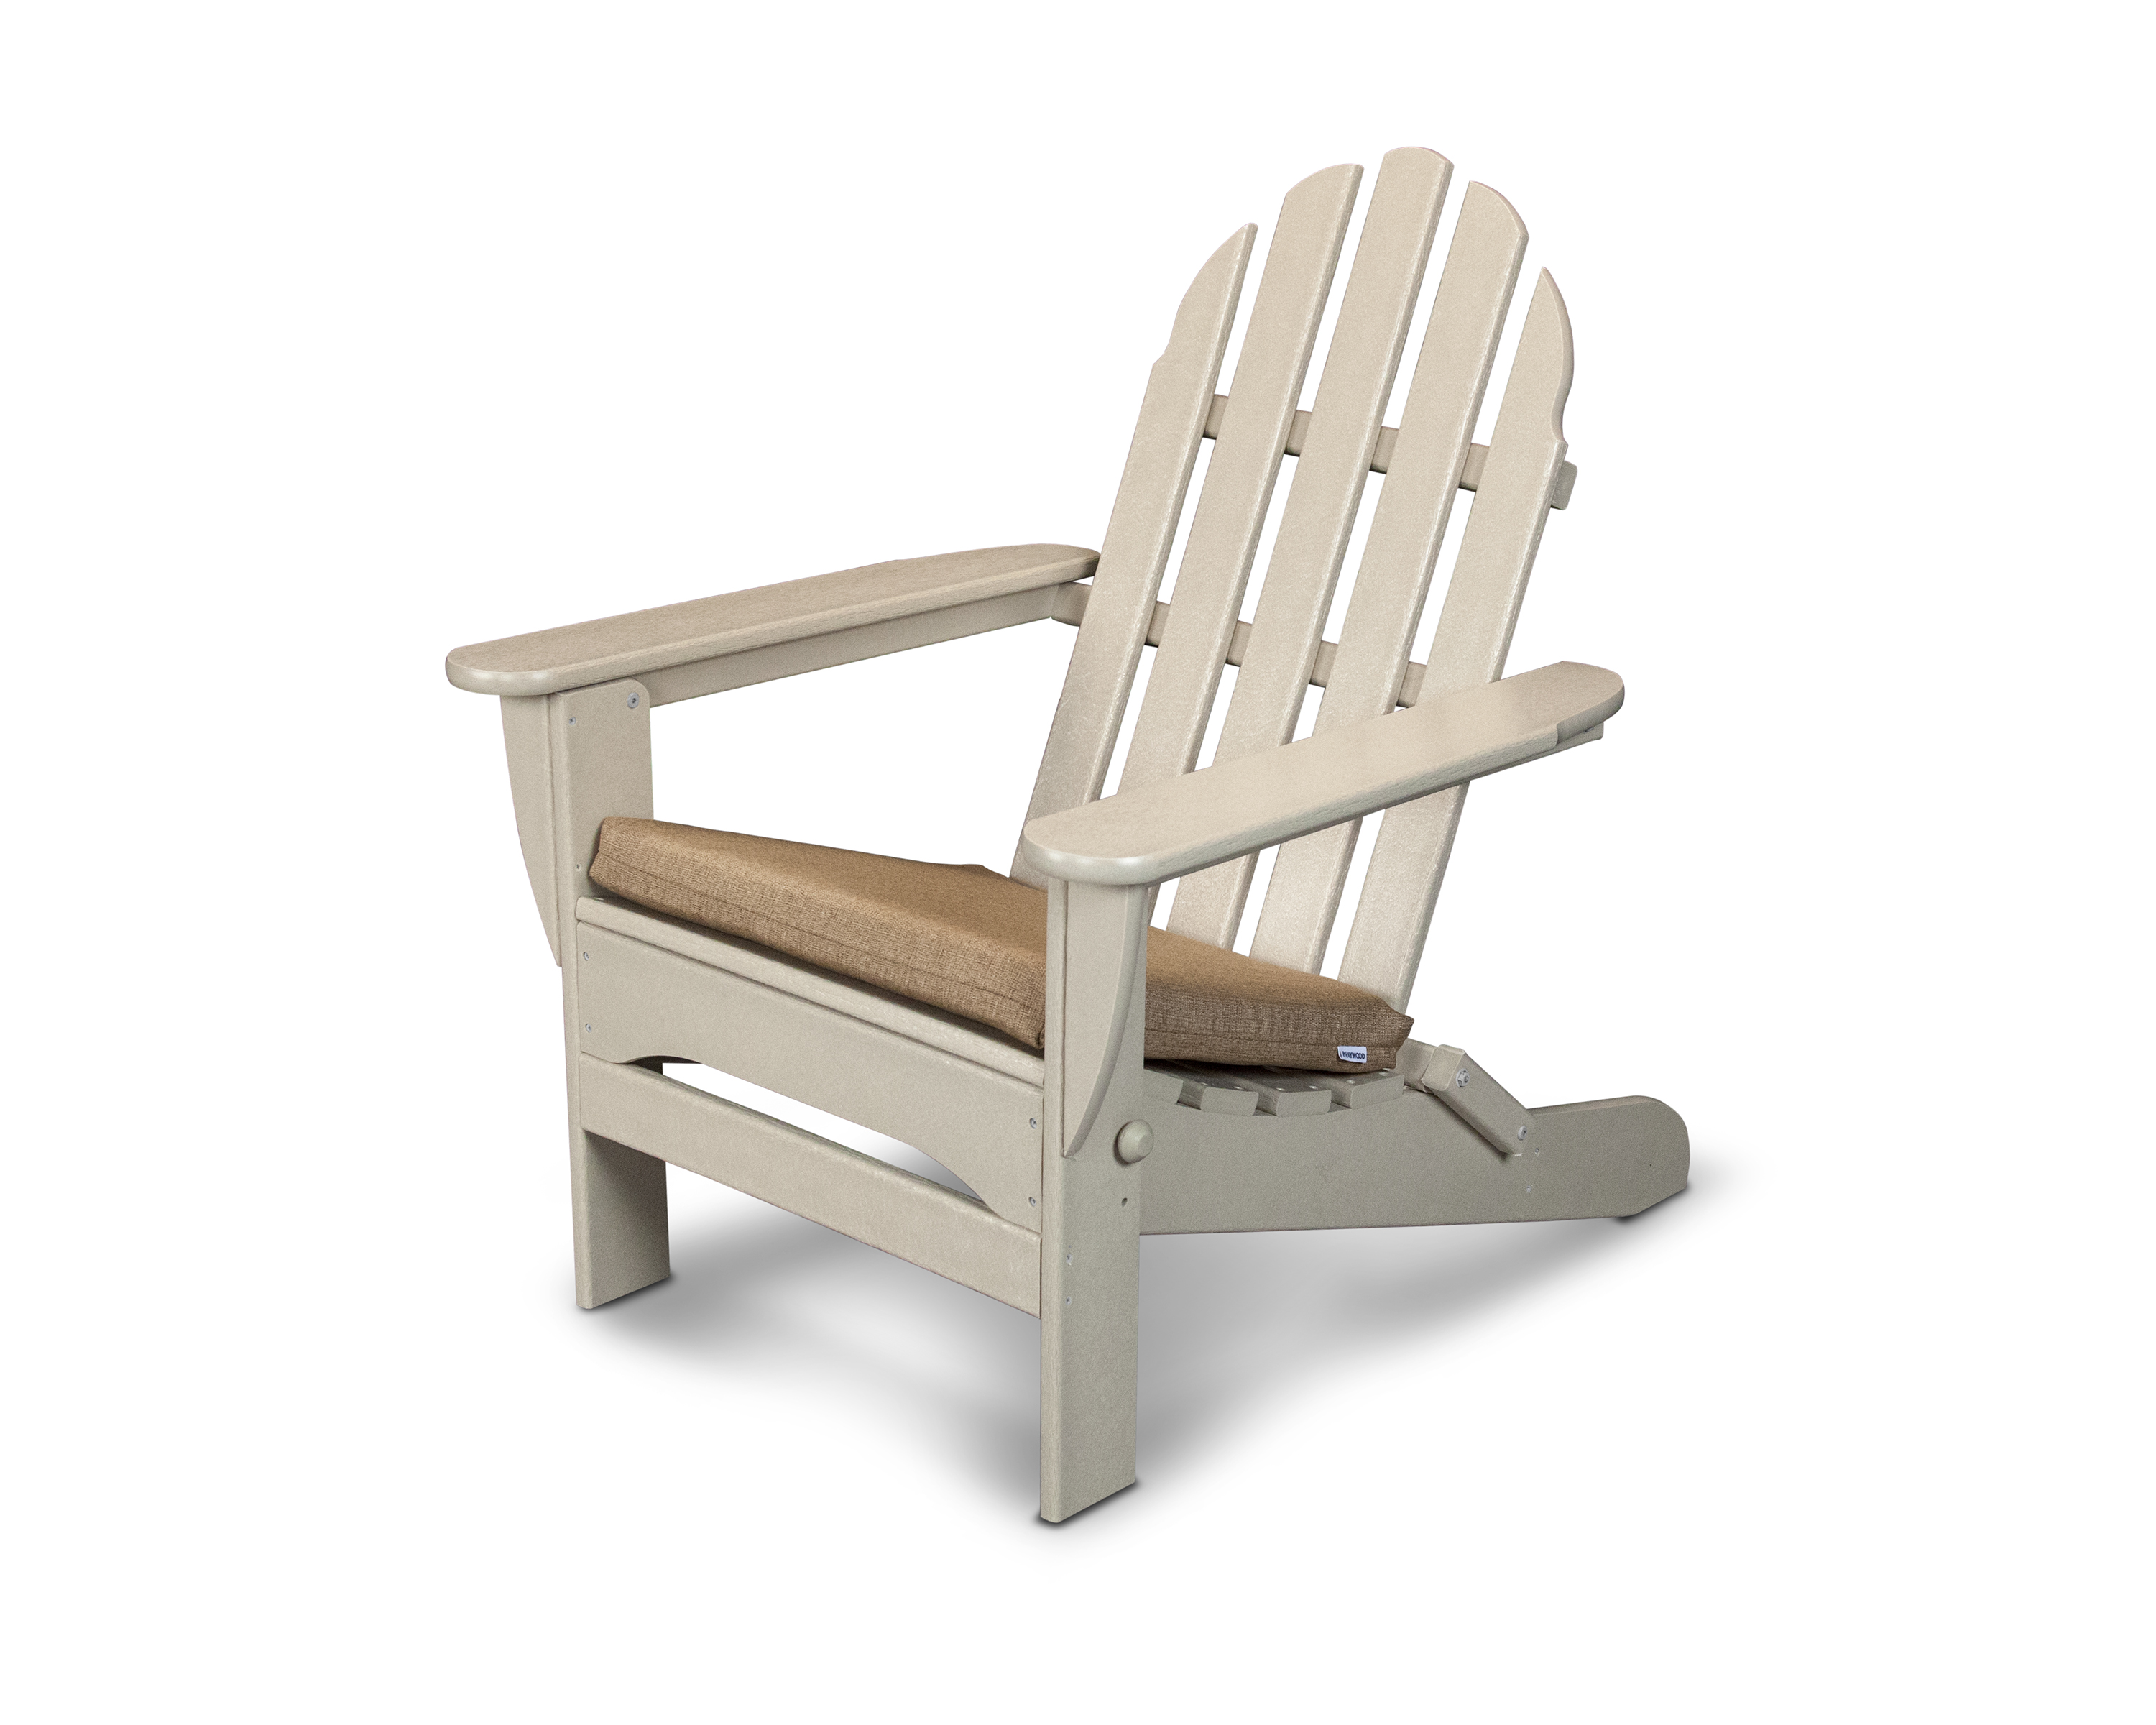 adirondack chair with seat cushion in sand / sesame product image